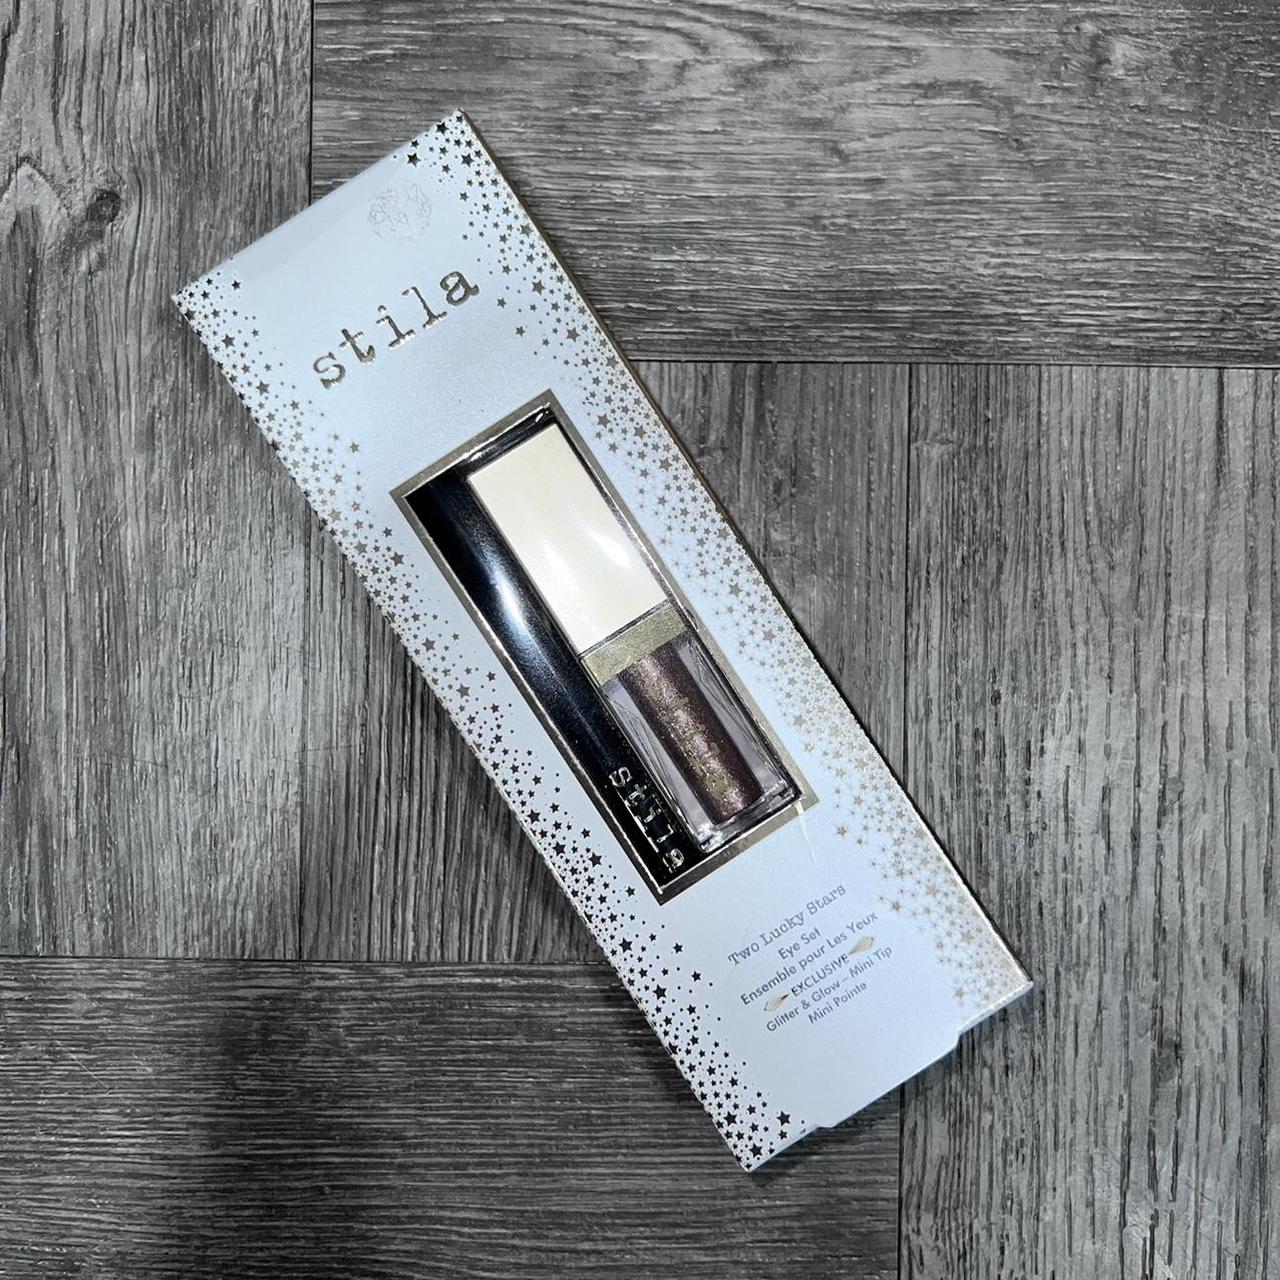 Product Image 1 - Brand new, Stila two lucky